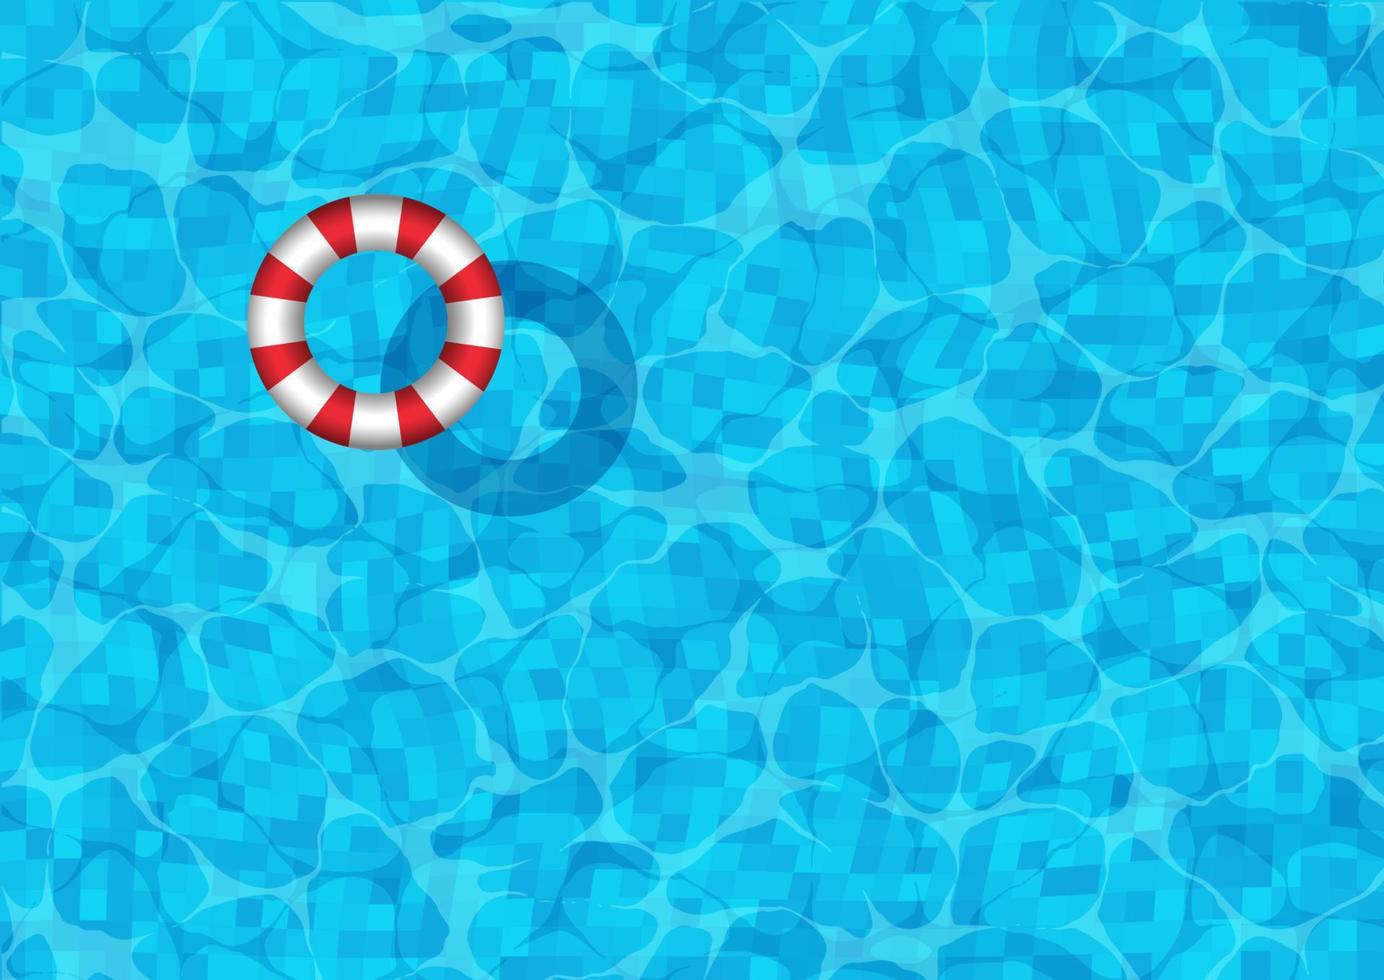 Swimming pool background with striped rubber ring vector